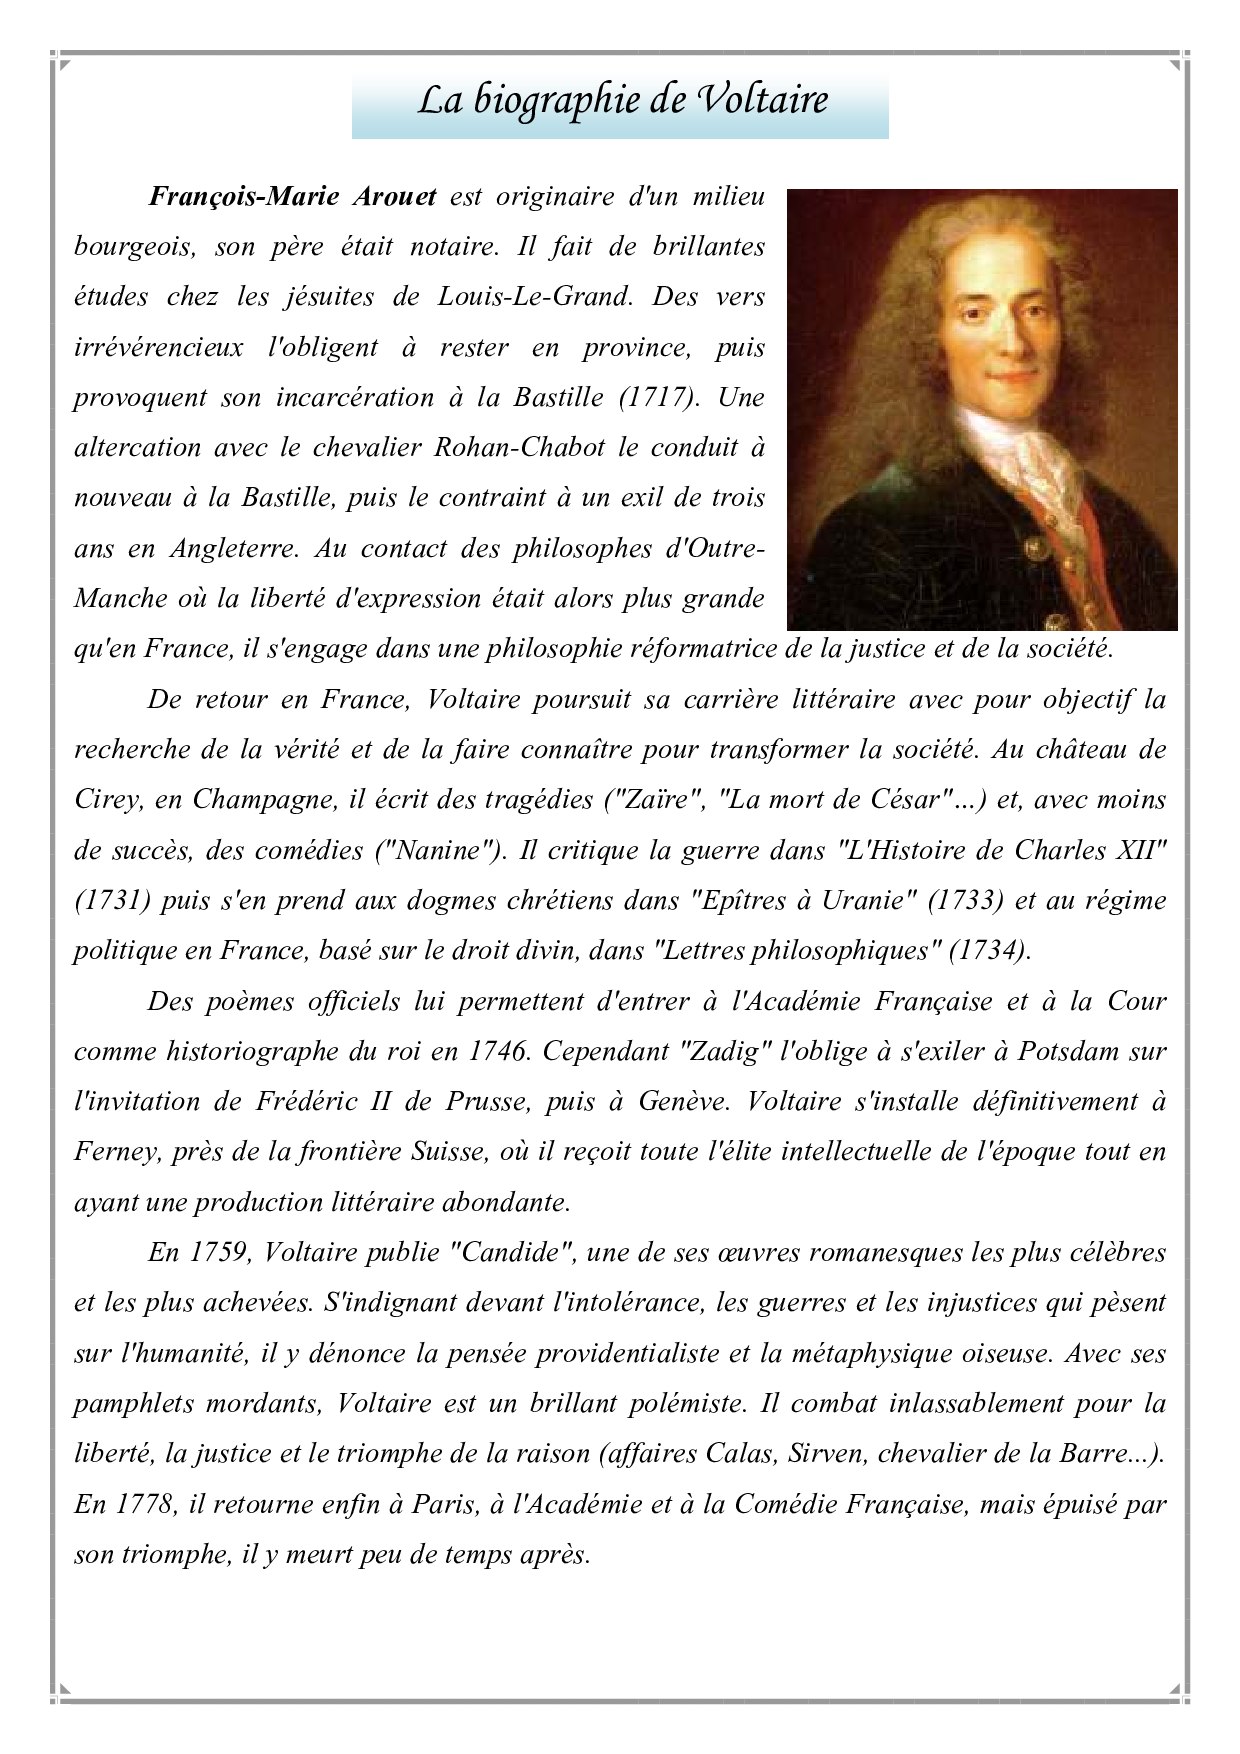 voltaire biography questions